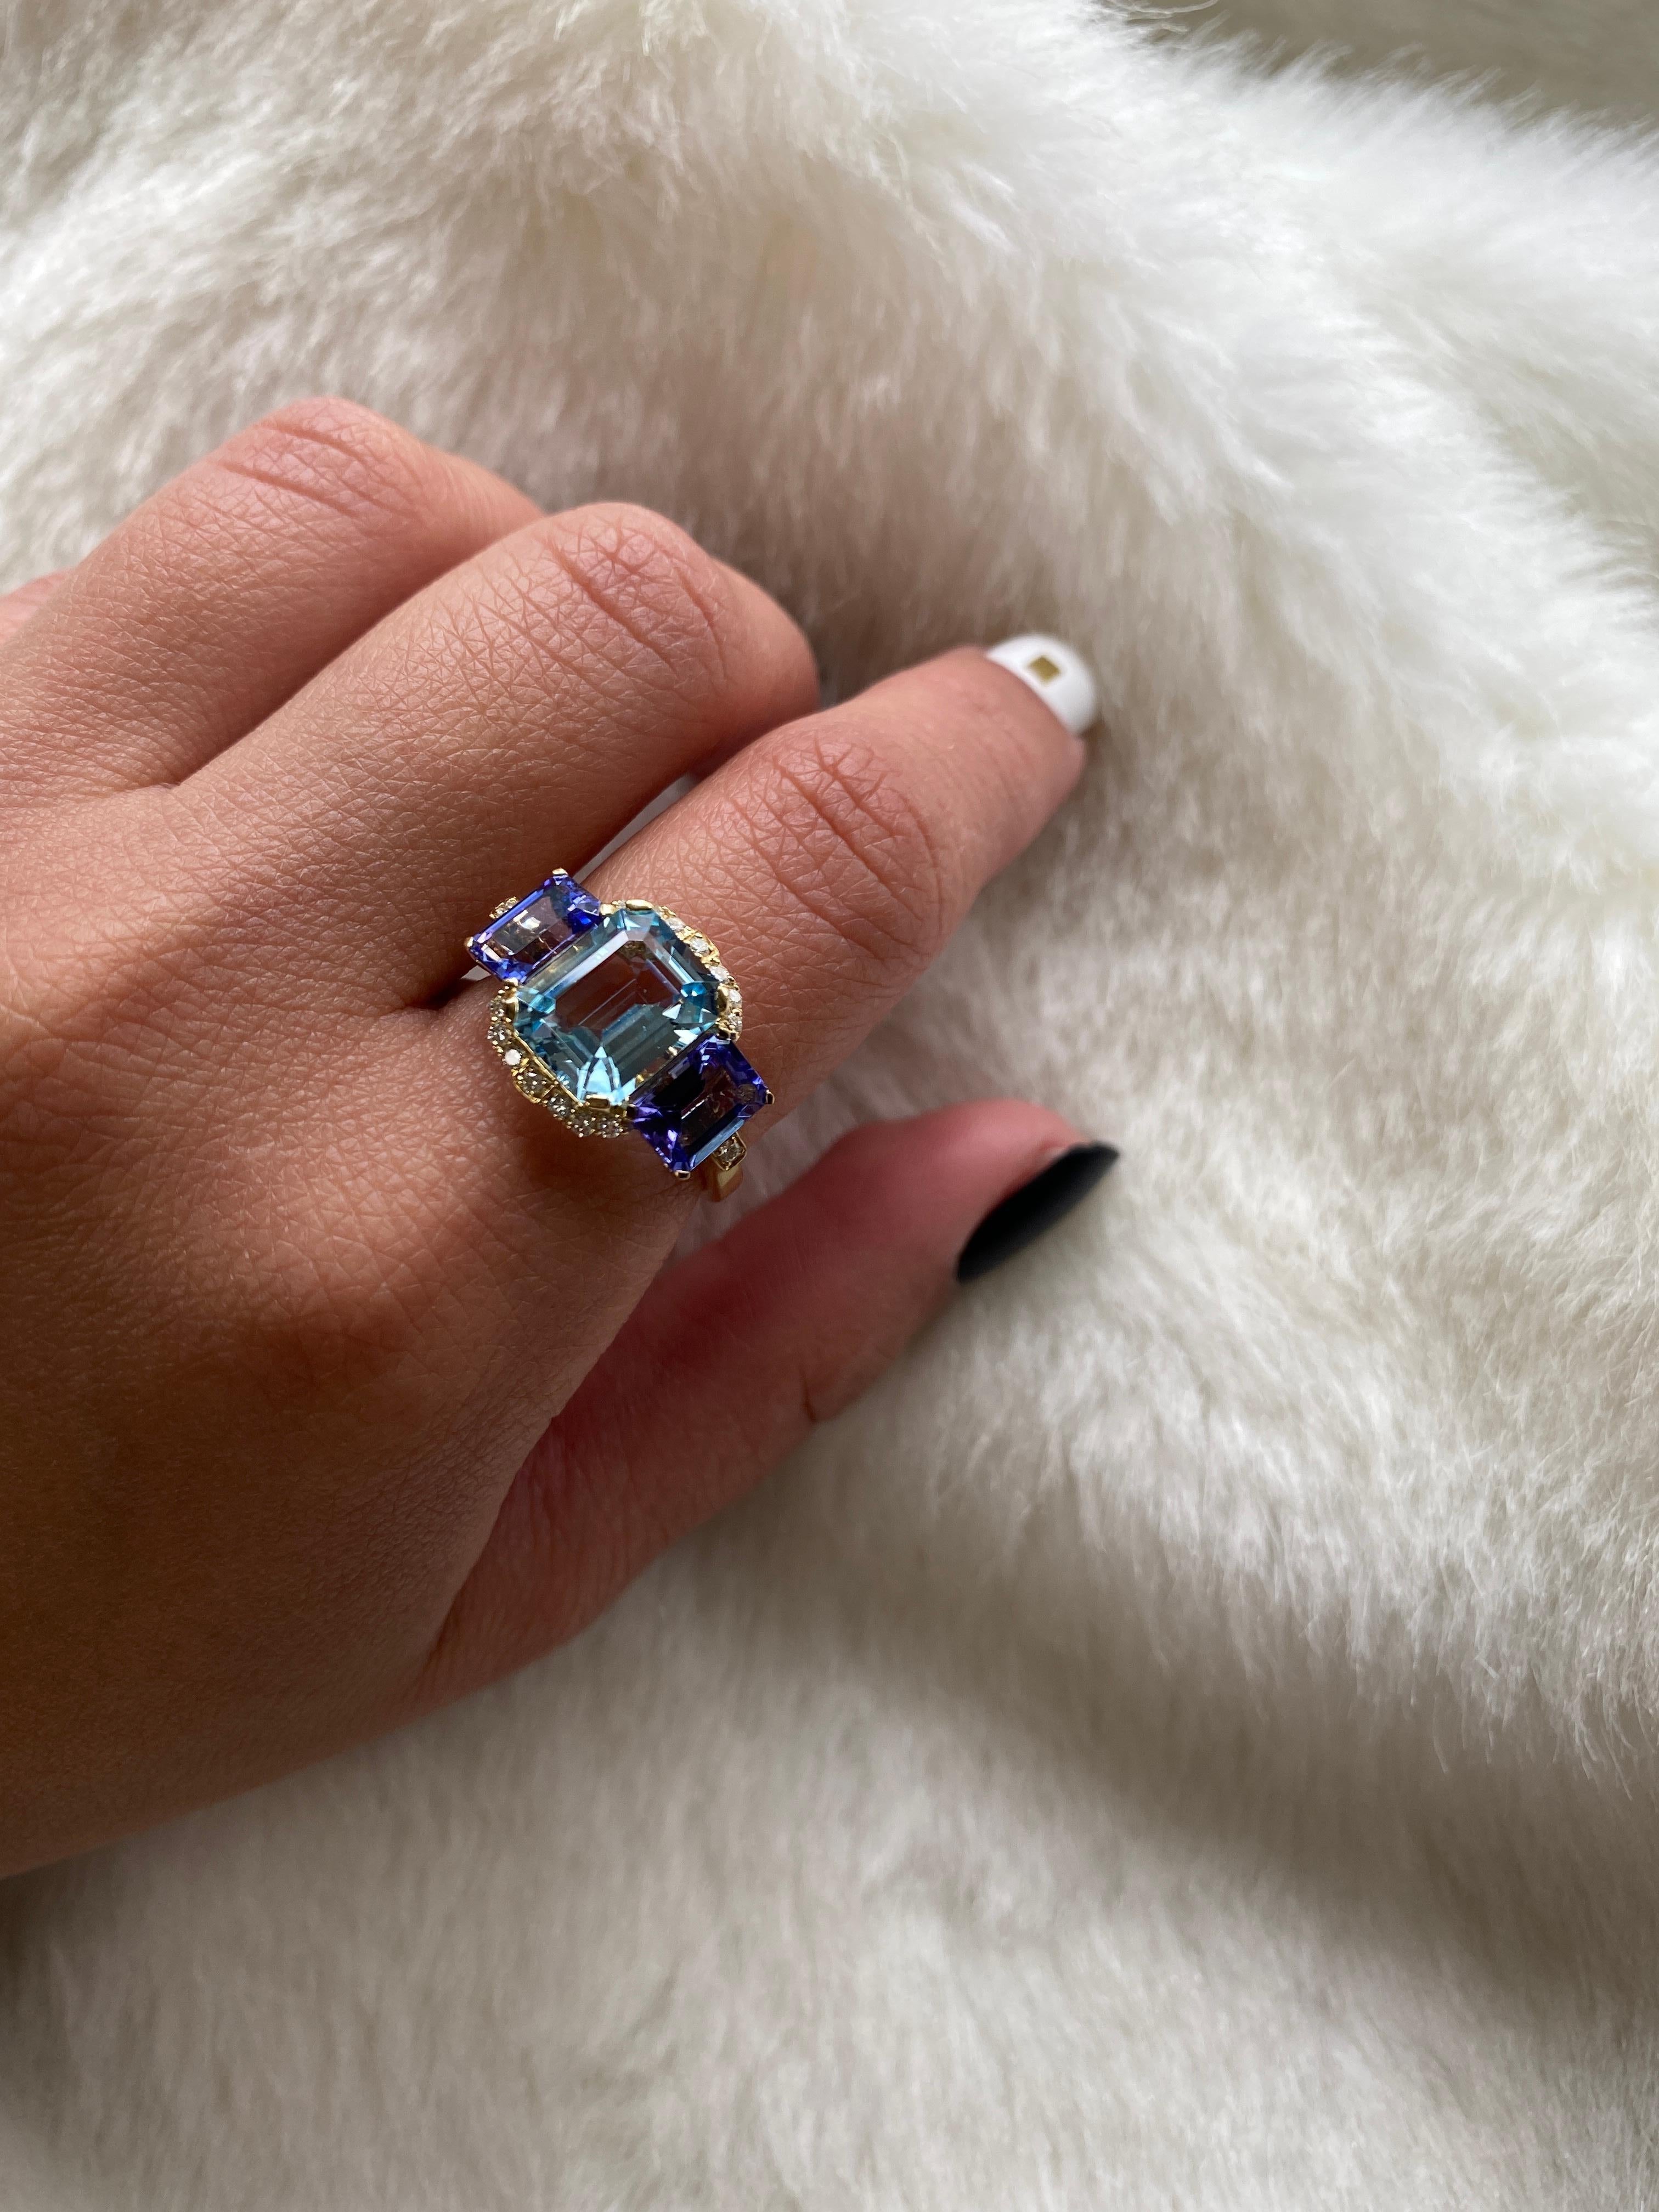 A perfect combination of Blue Topaz and Tanzanite is this 3 Stone Emerald Cut Ring with Diamonds set in 18K Yellow Gold. From our popular 'Gossip' Collection, this piece carries a hint of shock value.

* Stone Size: 10 x 8 - 7 x 5 mm
* Gemstone: